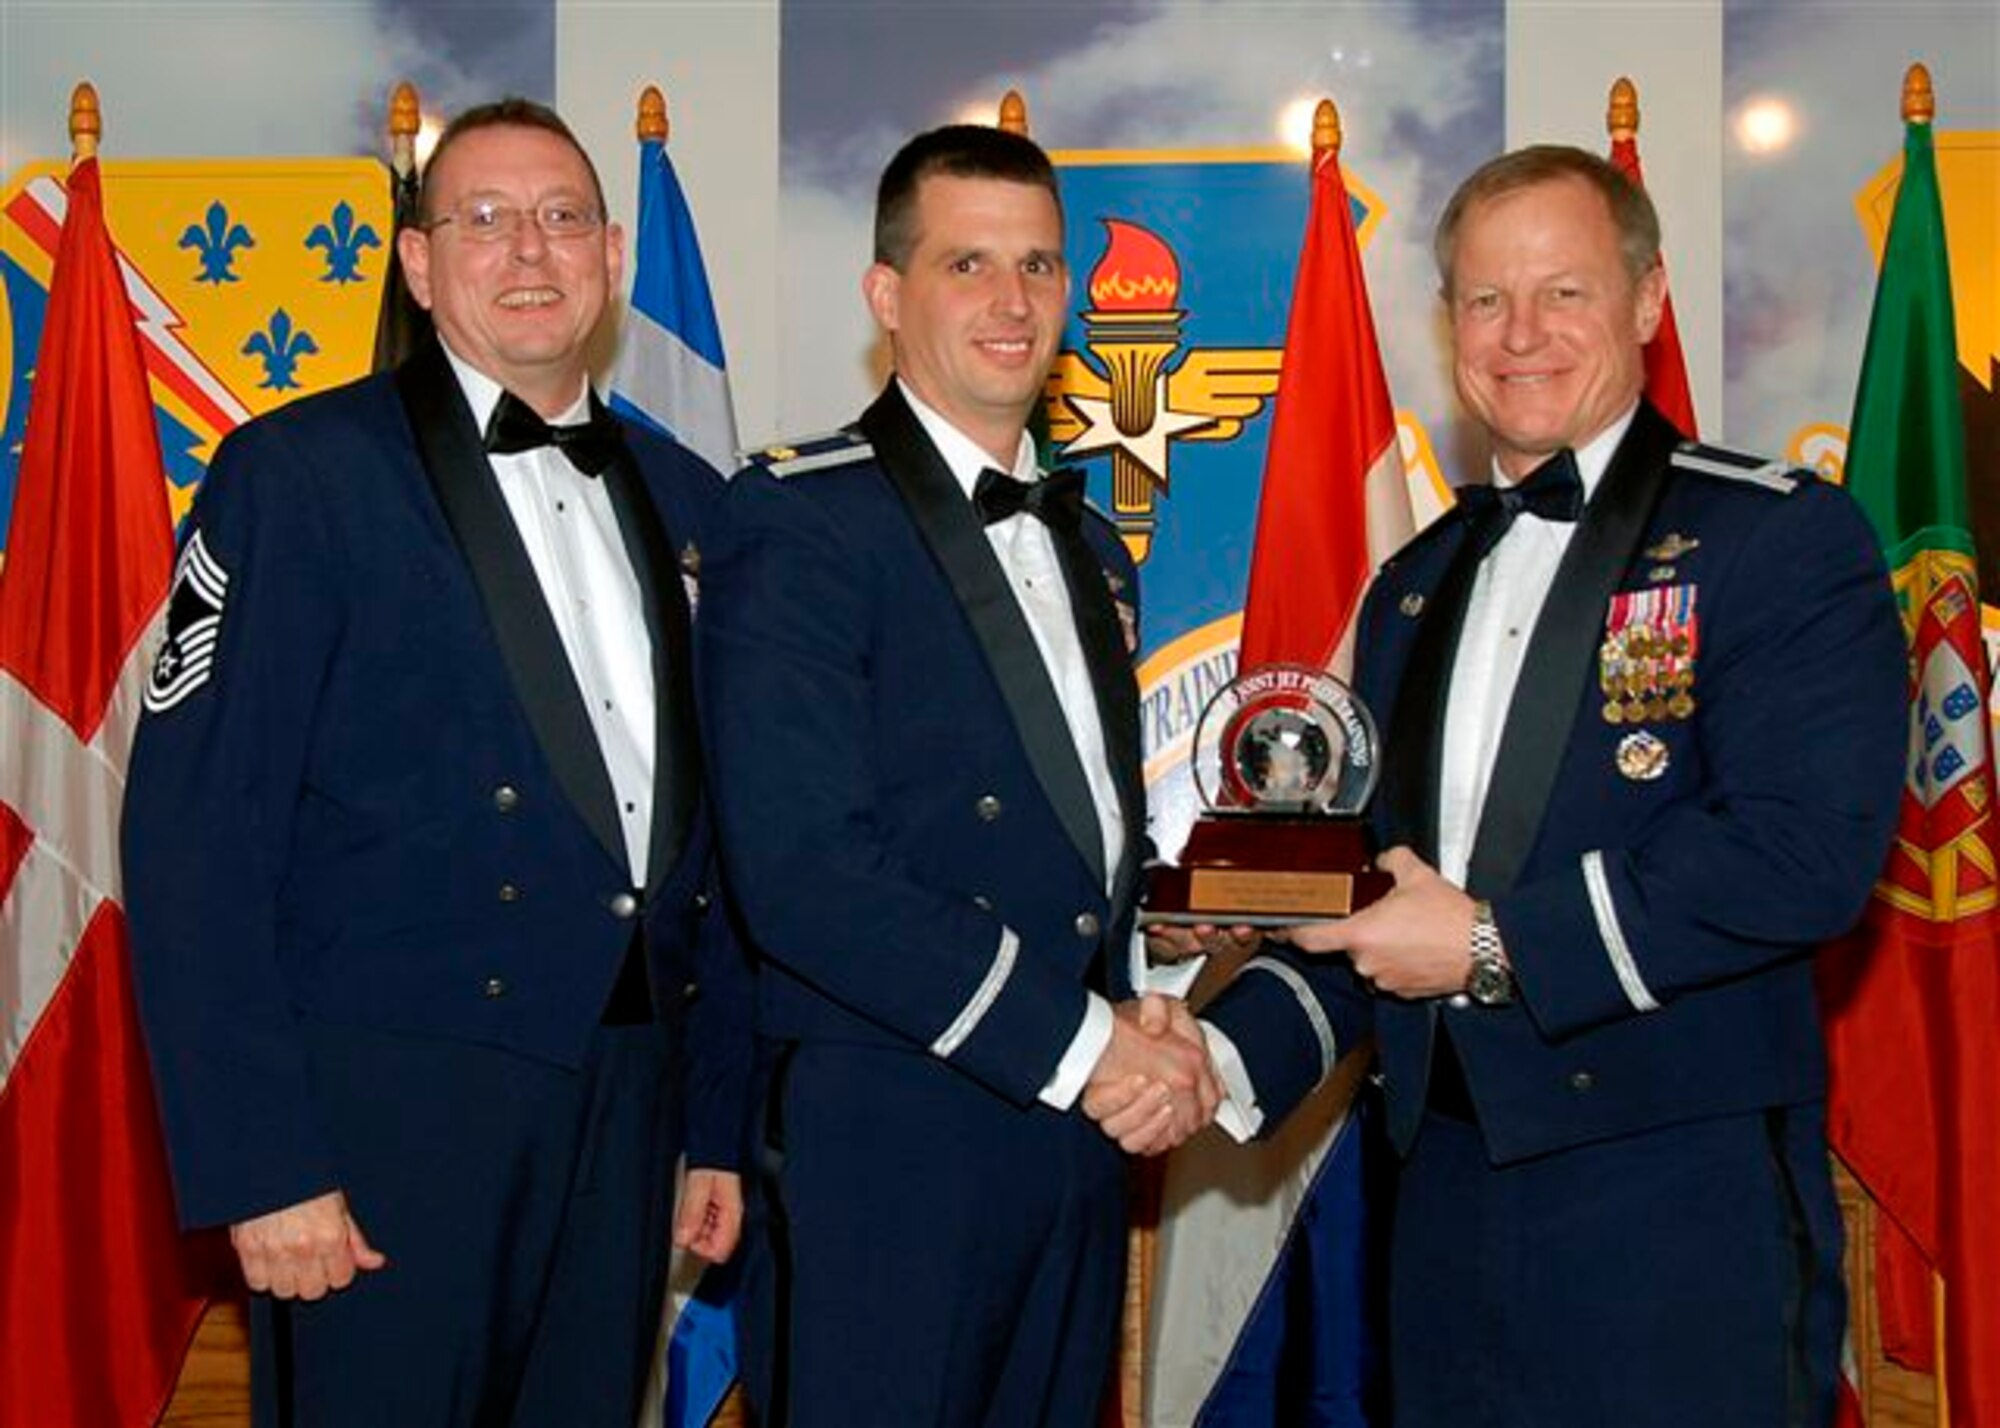 Maj. Jason Loe, center, accepts the award as the 80th Flying Training Wing's 2008 Senior Instructo Pilot of the Year. The 90th Flying Training Squadron major was recognized his role as a T-38 instructor pilot. He was selected to escort the Estonian air force Chief of Staff during NATO air chief’s visit in October 2008. Also pictured is Col. David Petersen, 80th FTW commander, and Chief Master Sgt. Norman Thierolf, the wing's command chief. (U.S. Air Force photo) 